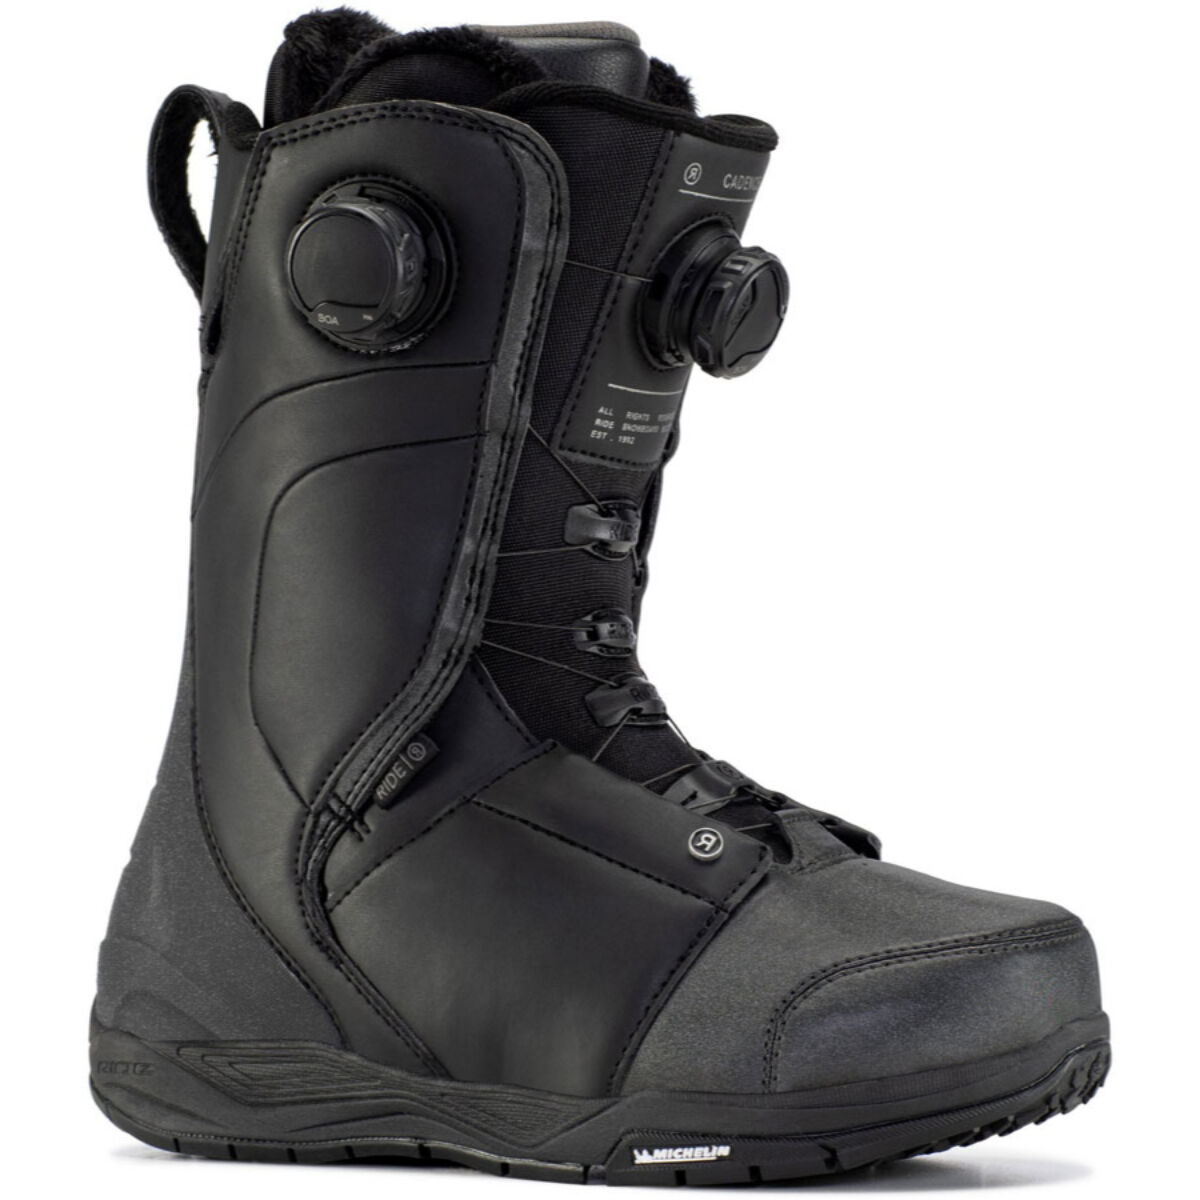 2020 Ride Cadence Womens Black Snowboard Boots 